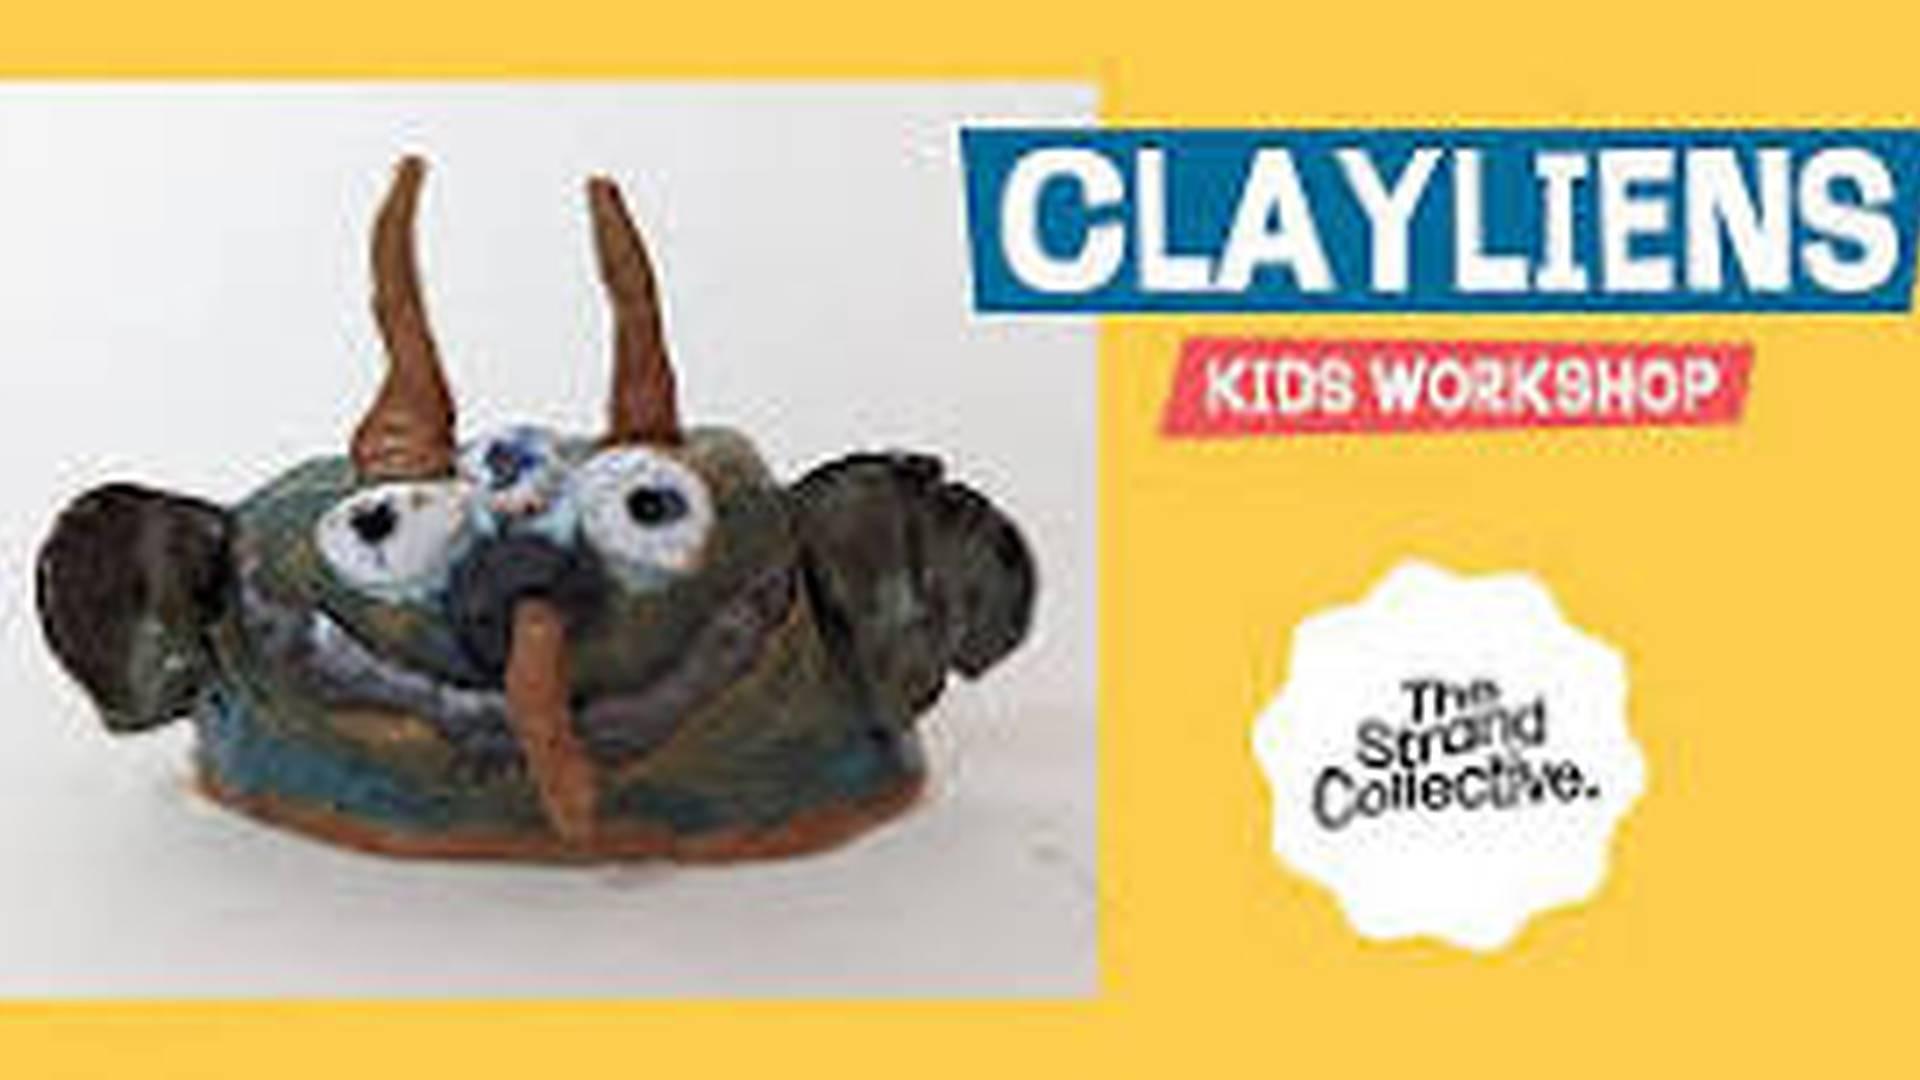 Clayliens workshop with Mike Cassidy (kids workshop) photo